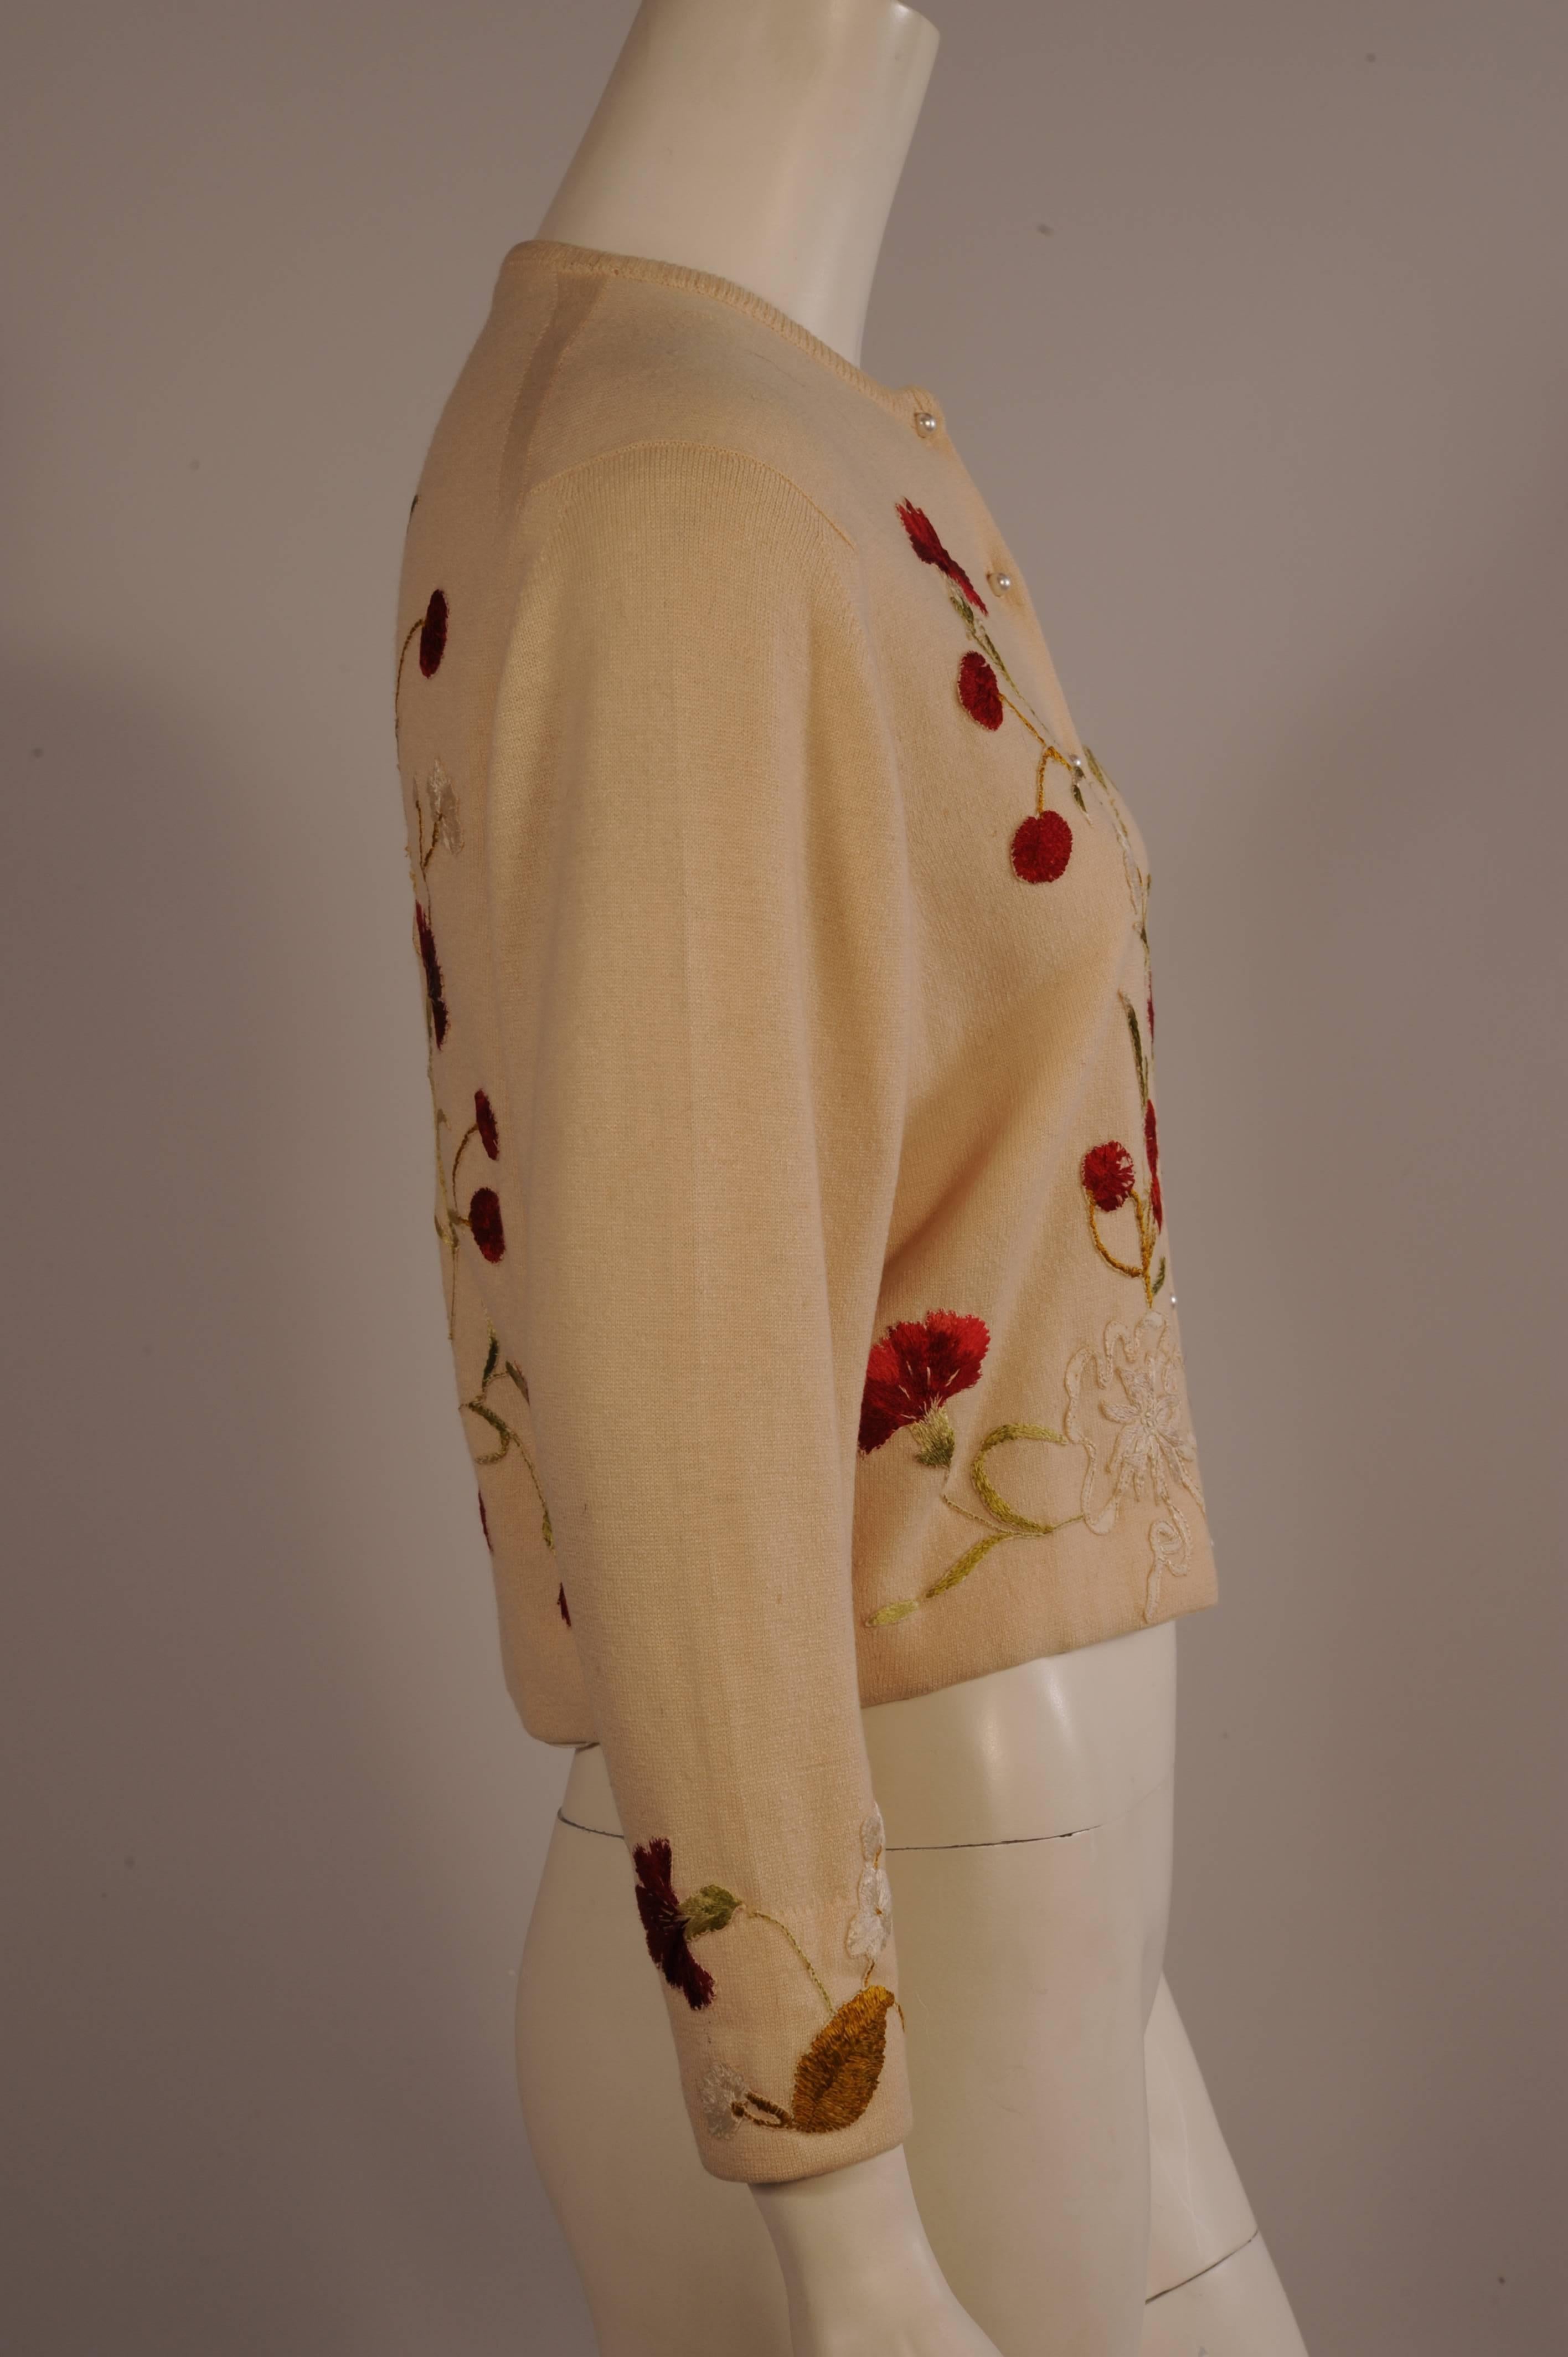 A luxurious cream cashmere sweater, purchased from Bergdorf Goodman, was altered and enhanced by the seamstress' working in the ballroom of the home of Helen Bond Carruthers. The front, back and cuffs have been hand appliqued with silk hand